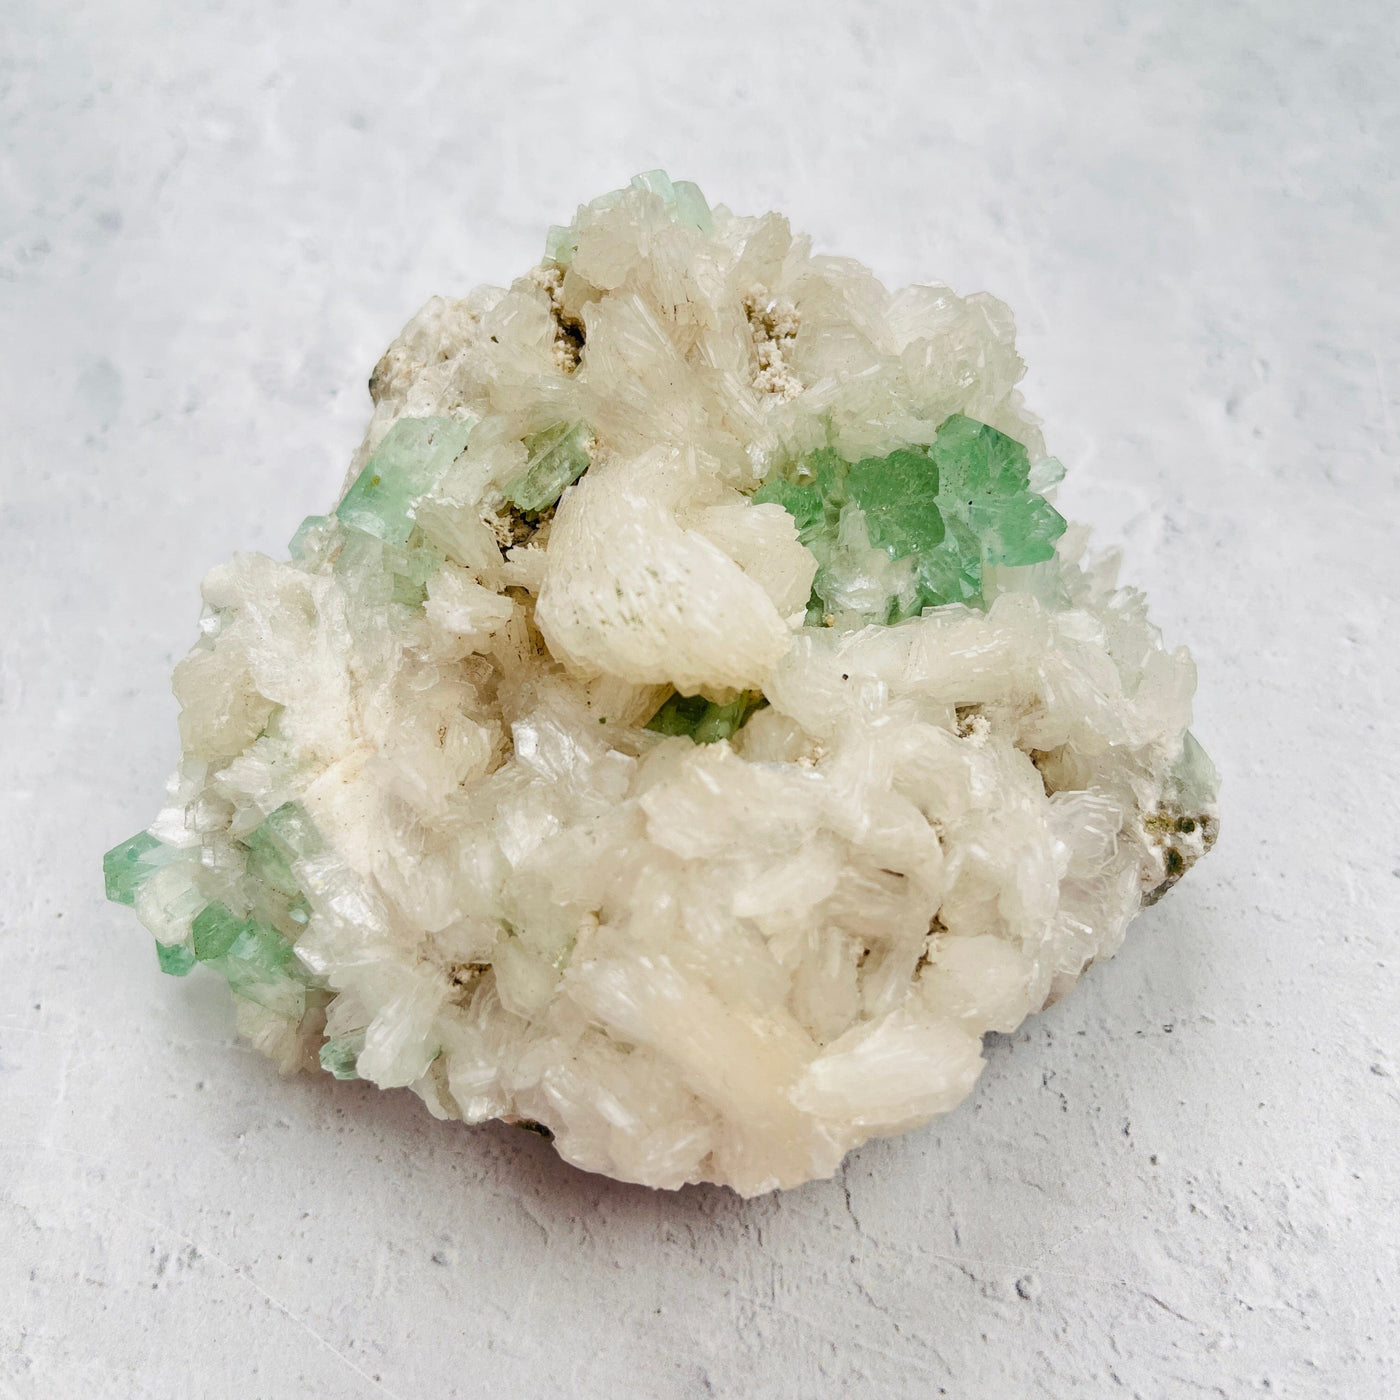 Green Apophyllite with Stilbite Crystal Clusters Zeolites - Front View